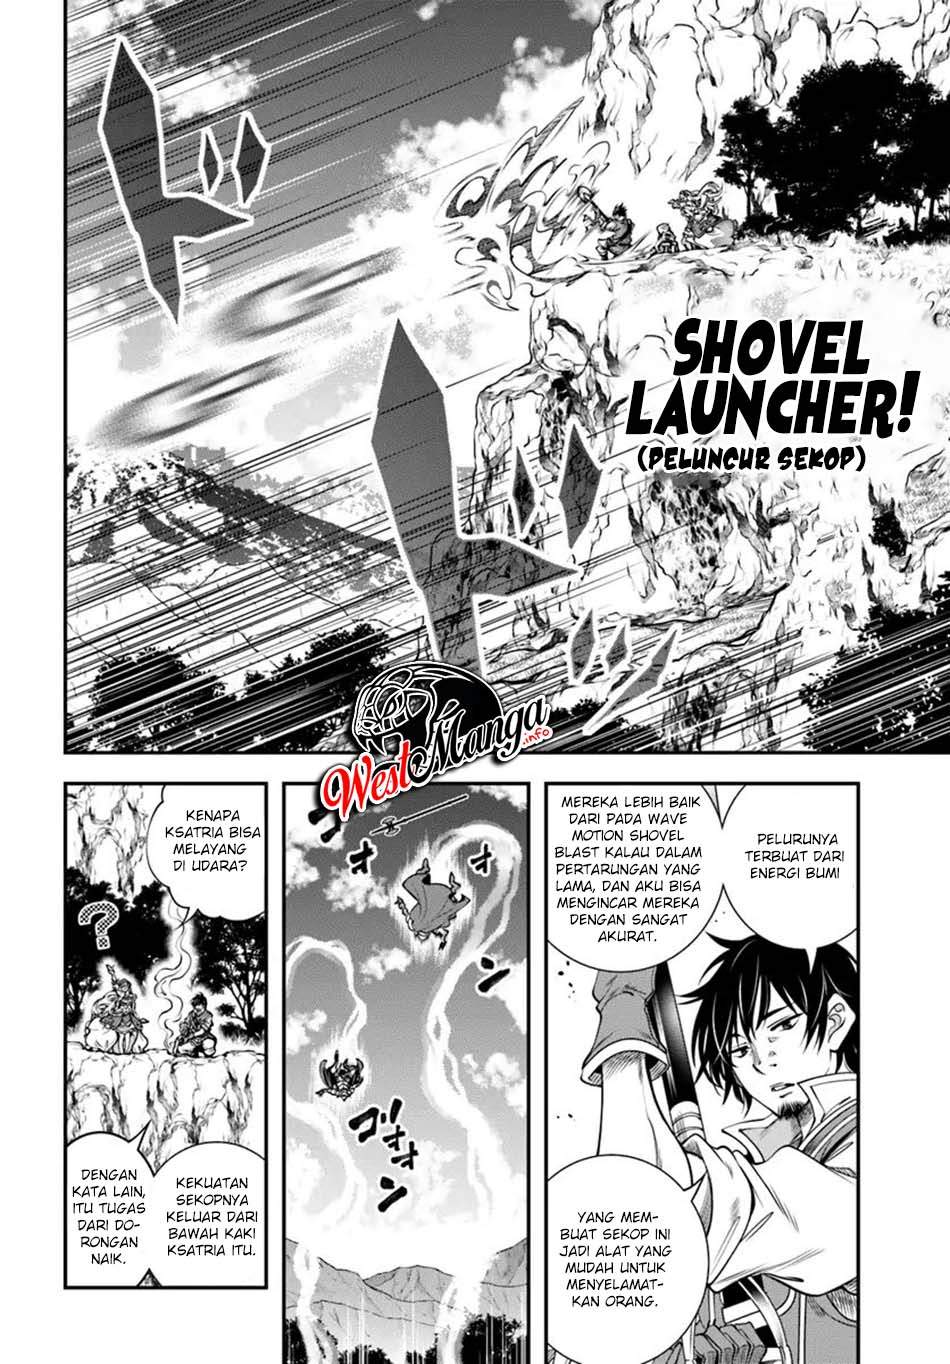 The Invincible Shovel Chapter 03. - 263